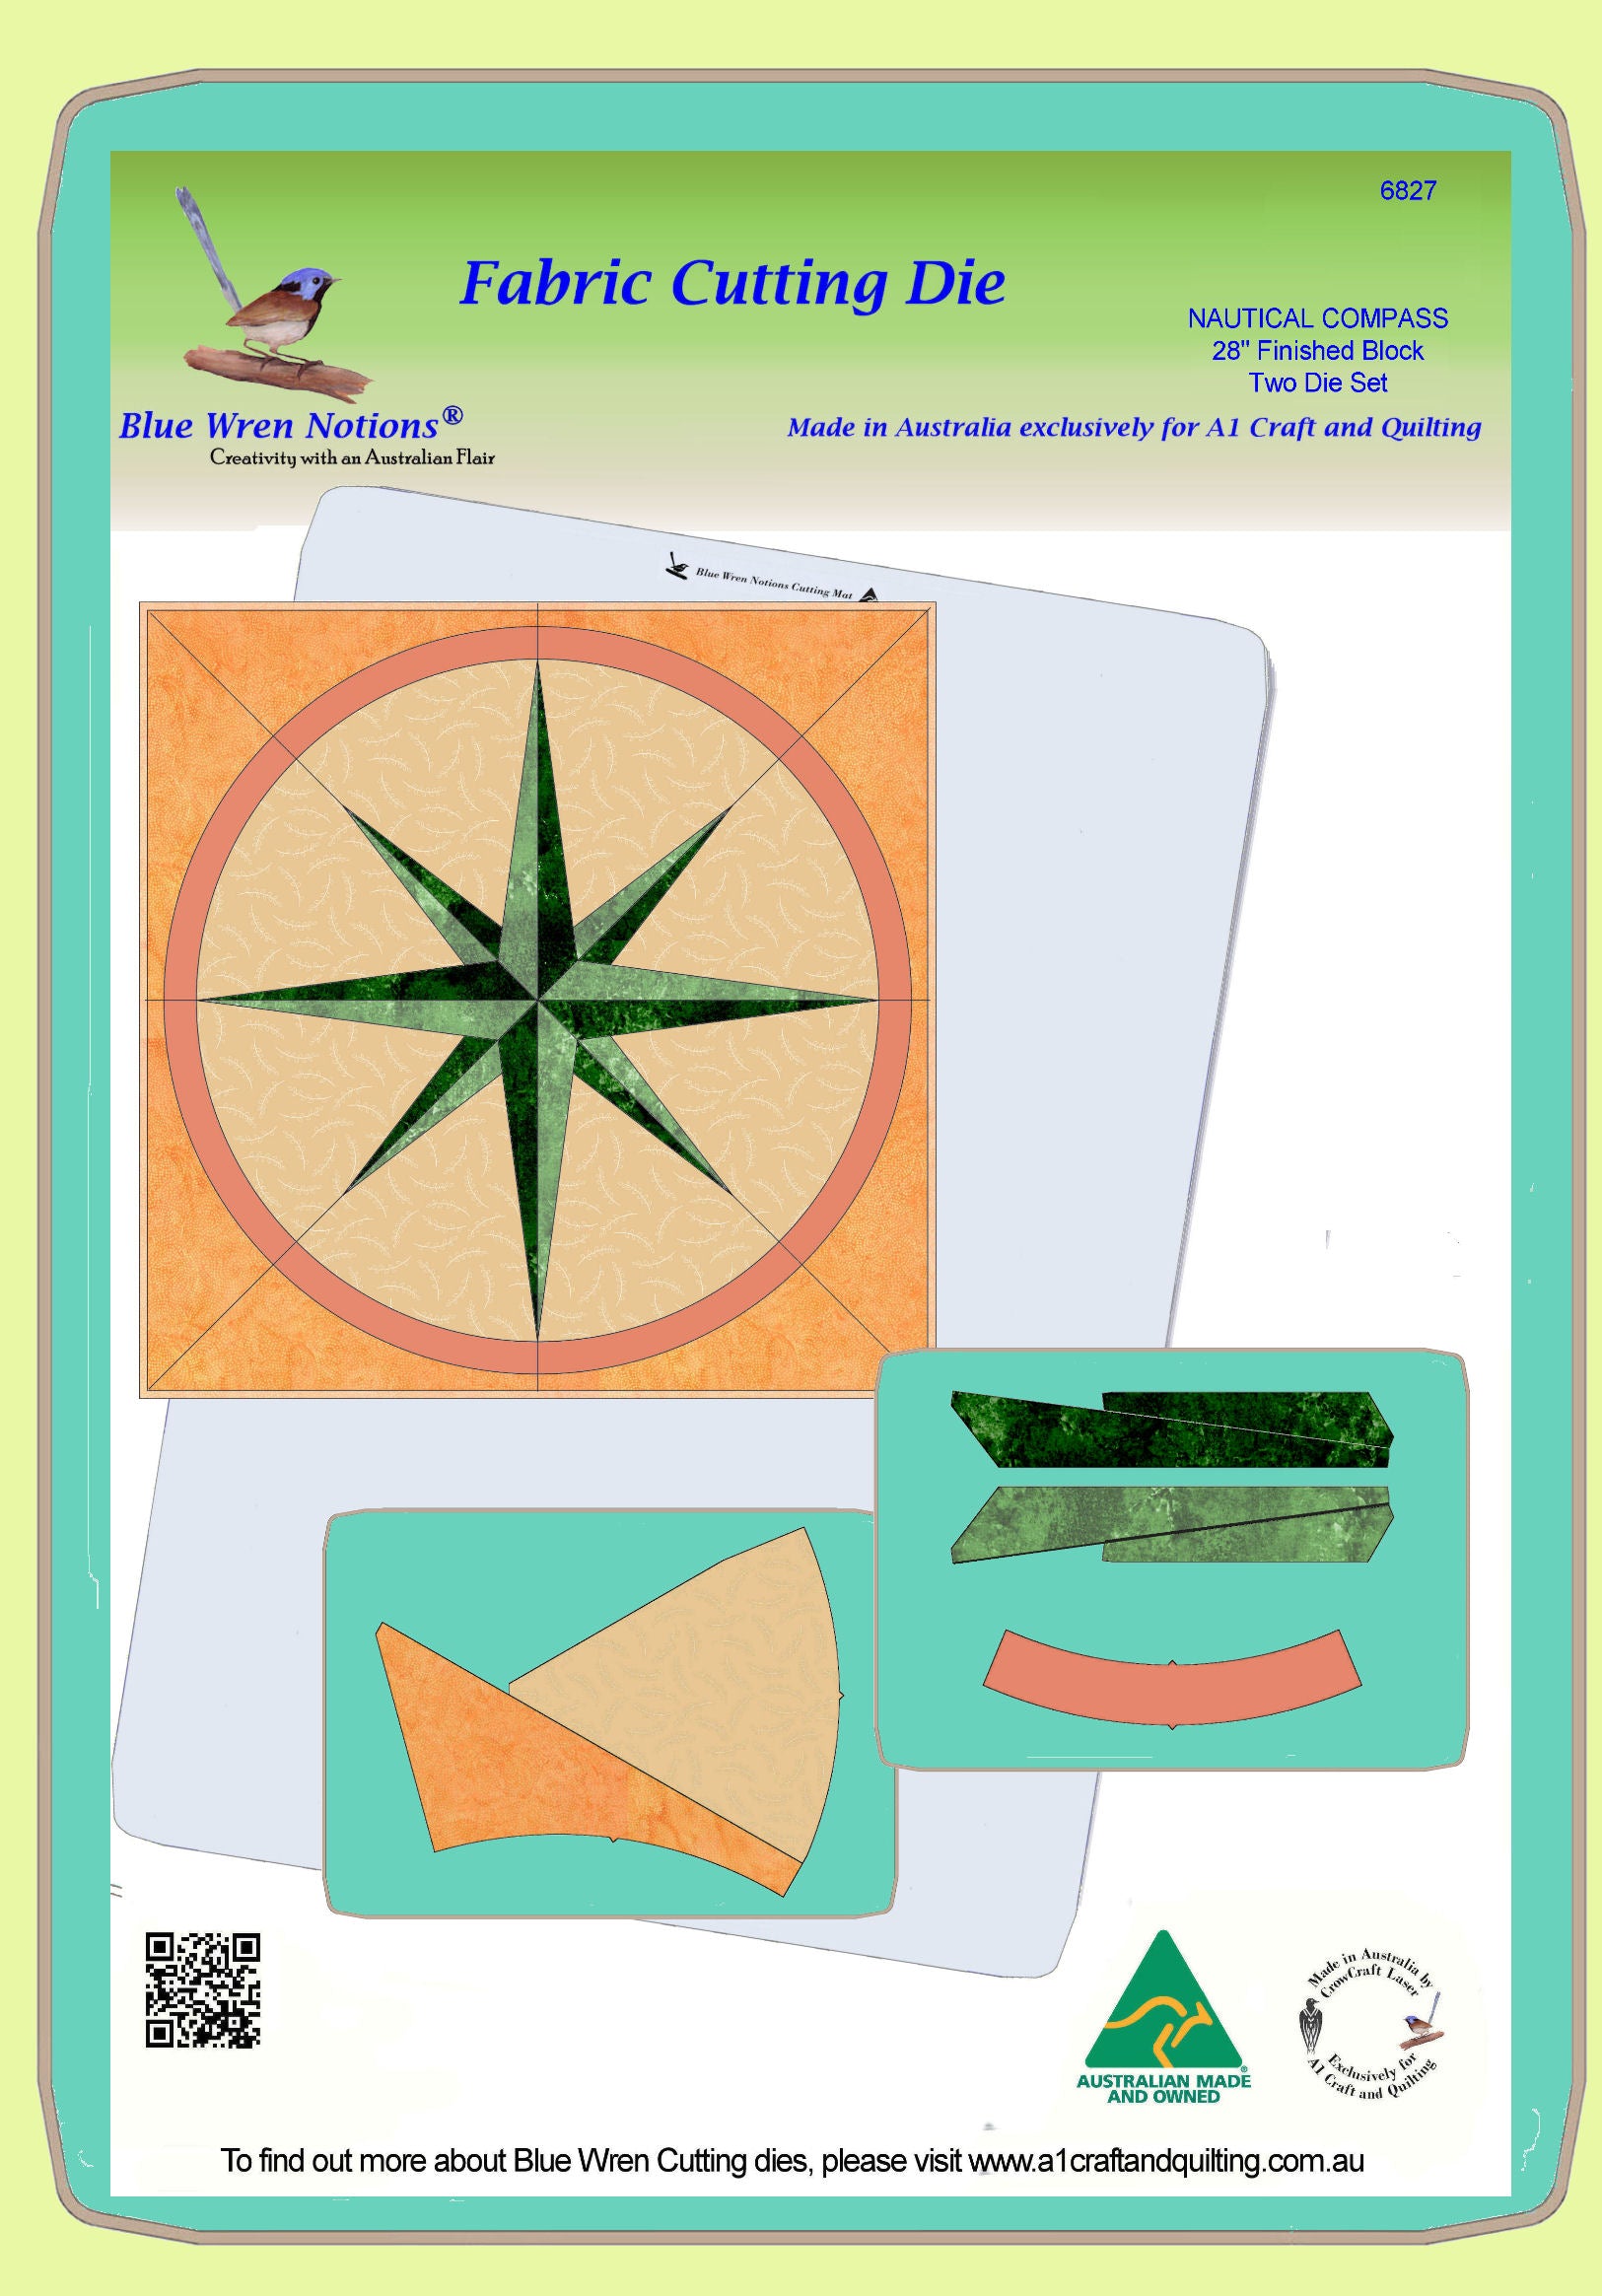 Nautical Compass - 6827 - makes an 24" block - Two die Set - pattern instructions and mat included